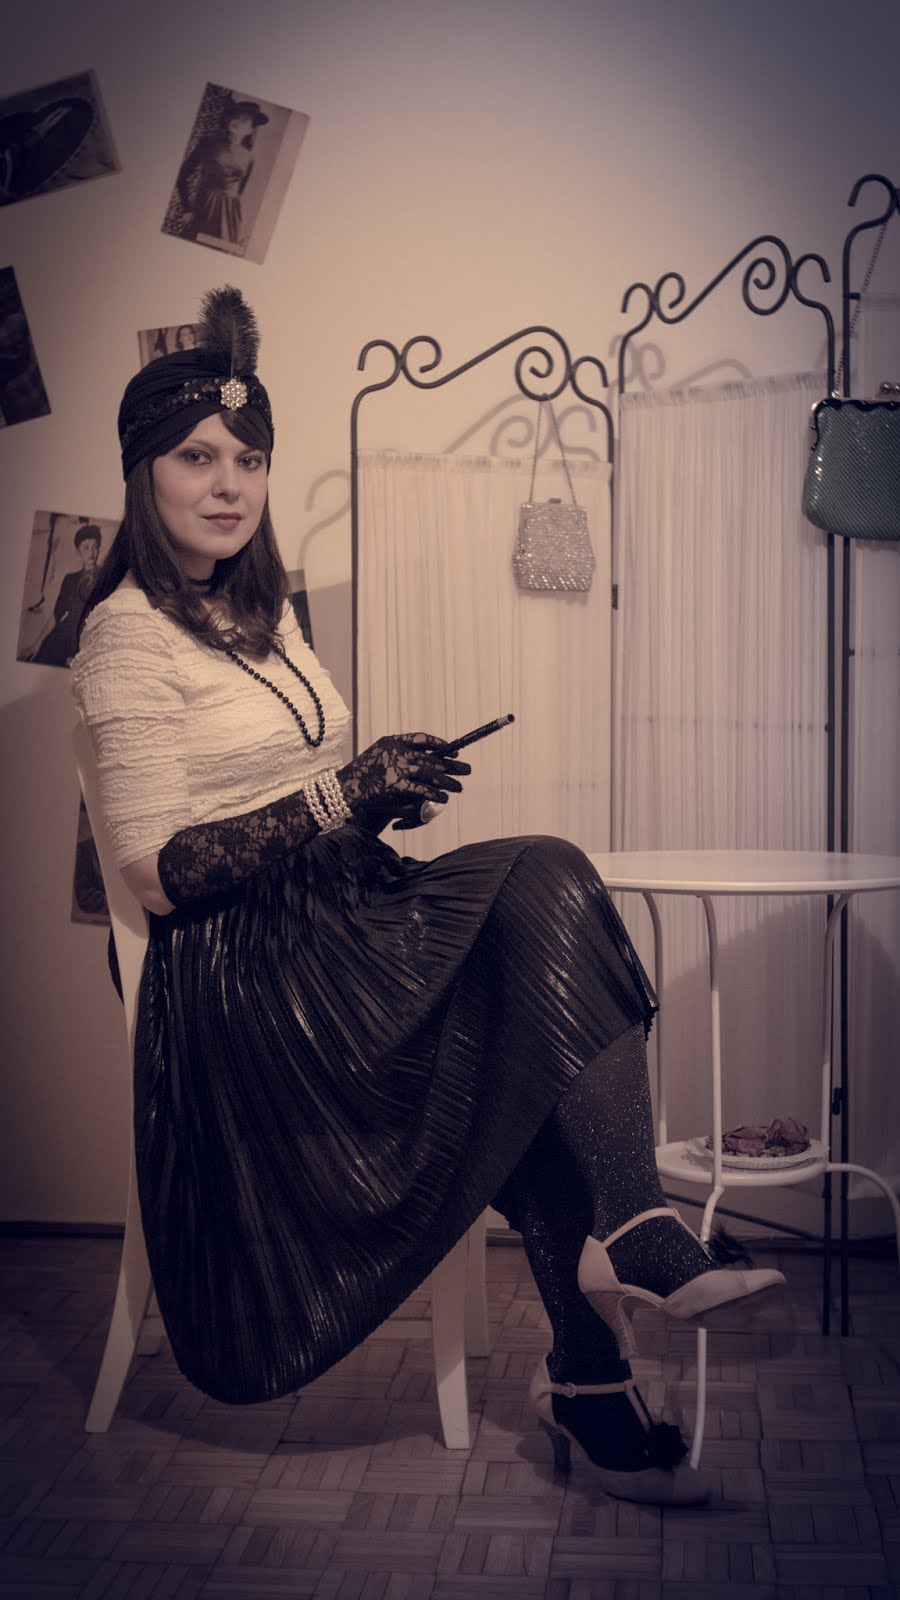 great Gatsby outfit party inspiration pleated skirt stradivarius lace H&M top t strap shoes bata turban roaring 20s style twenties flapper girl cigarette zara belt sparkly black lace gloves